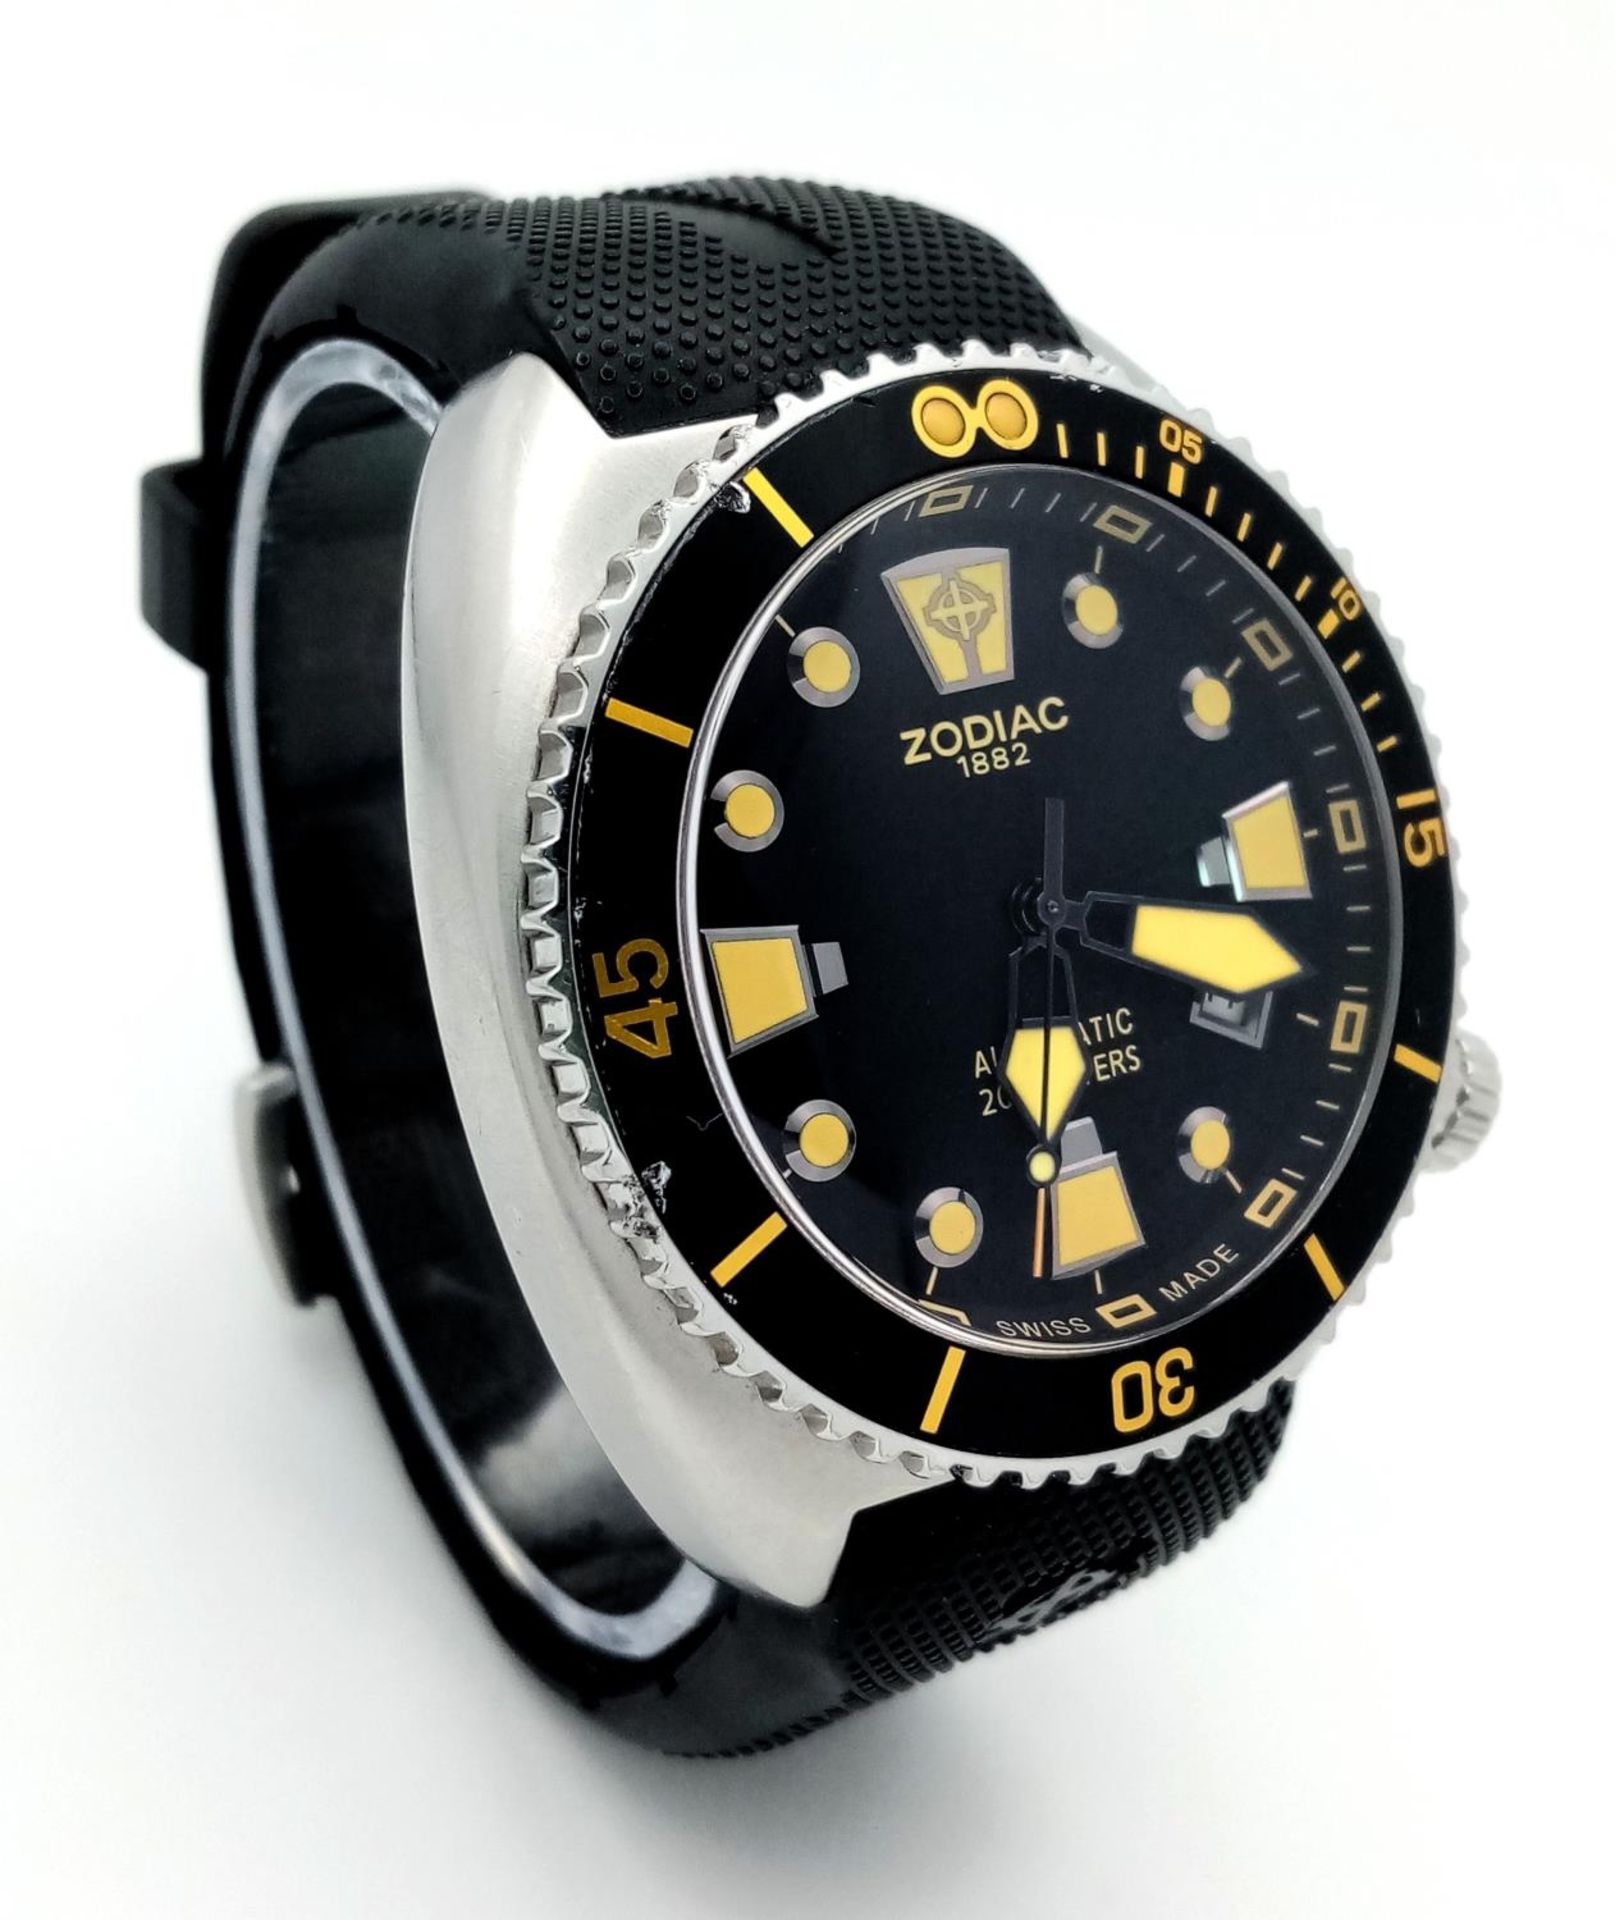 A Zodiac Automatic Gents Divers Watch. Water resistant to 200m. Black rubber strap. Stainless - Bild 3 aus 5